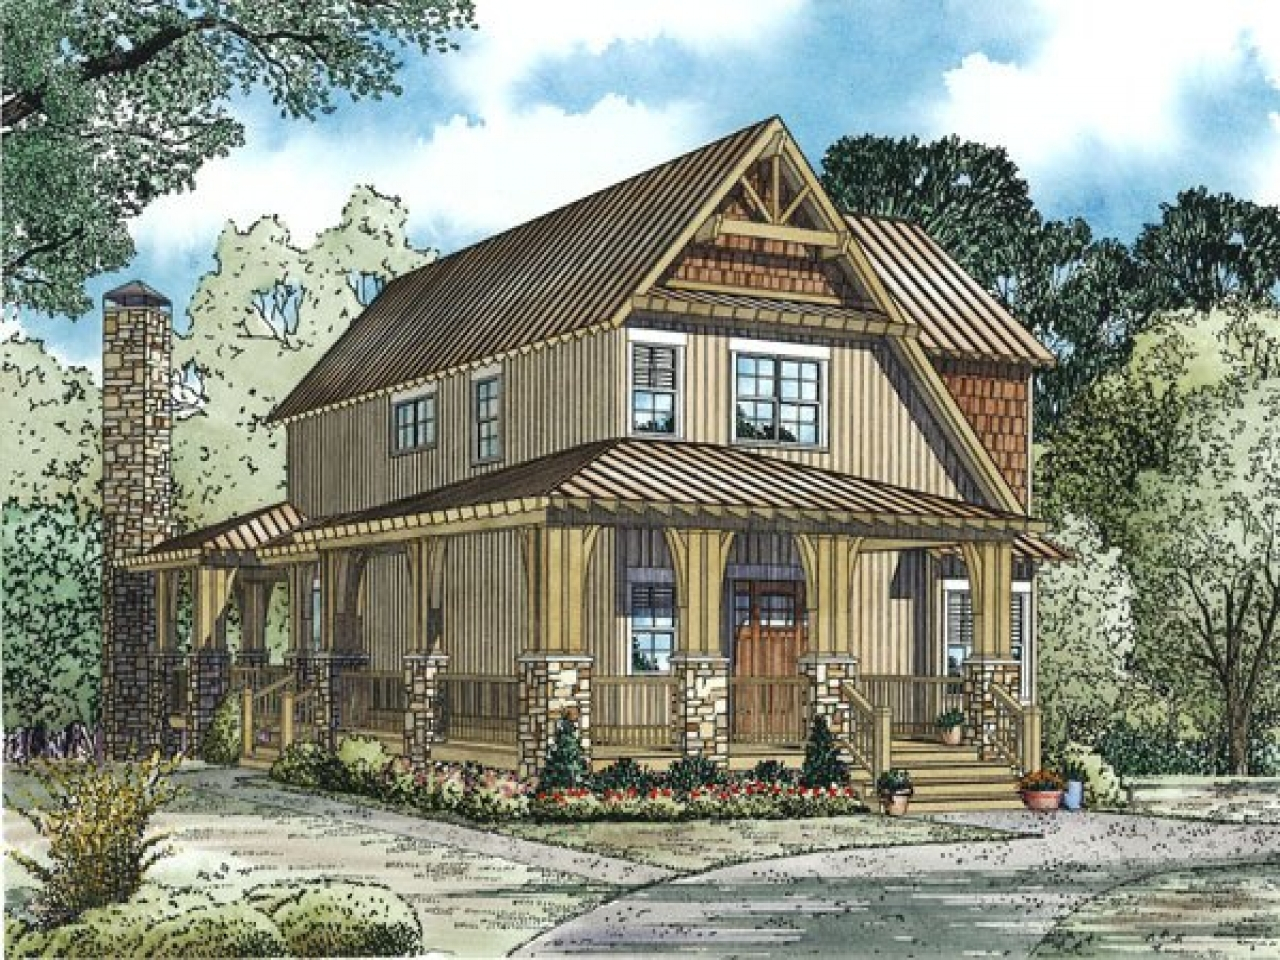 Bungalow House  Plans  With Wrap  Around  Porch  8c6062295cd9 